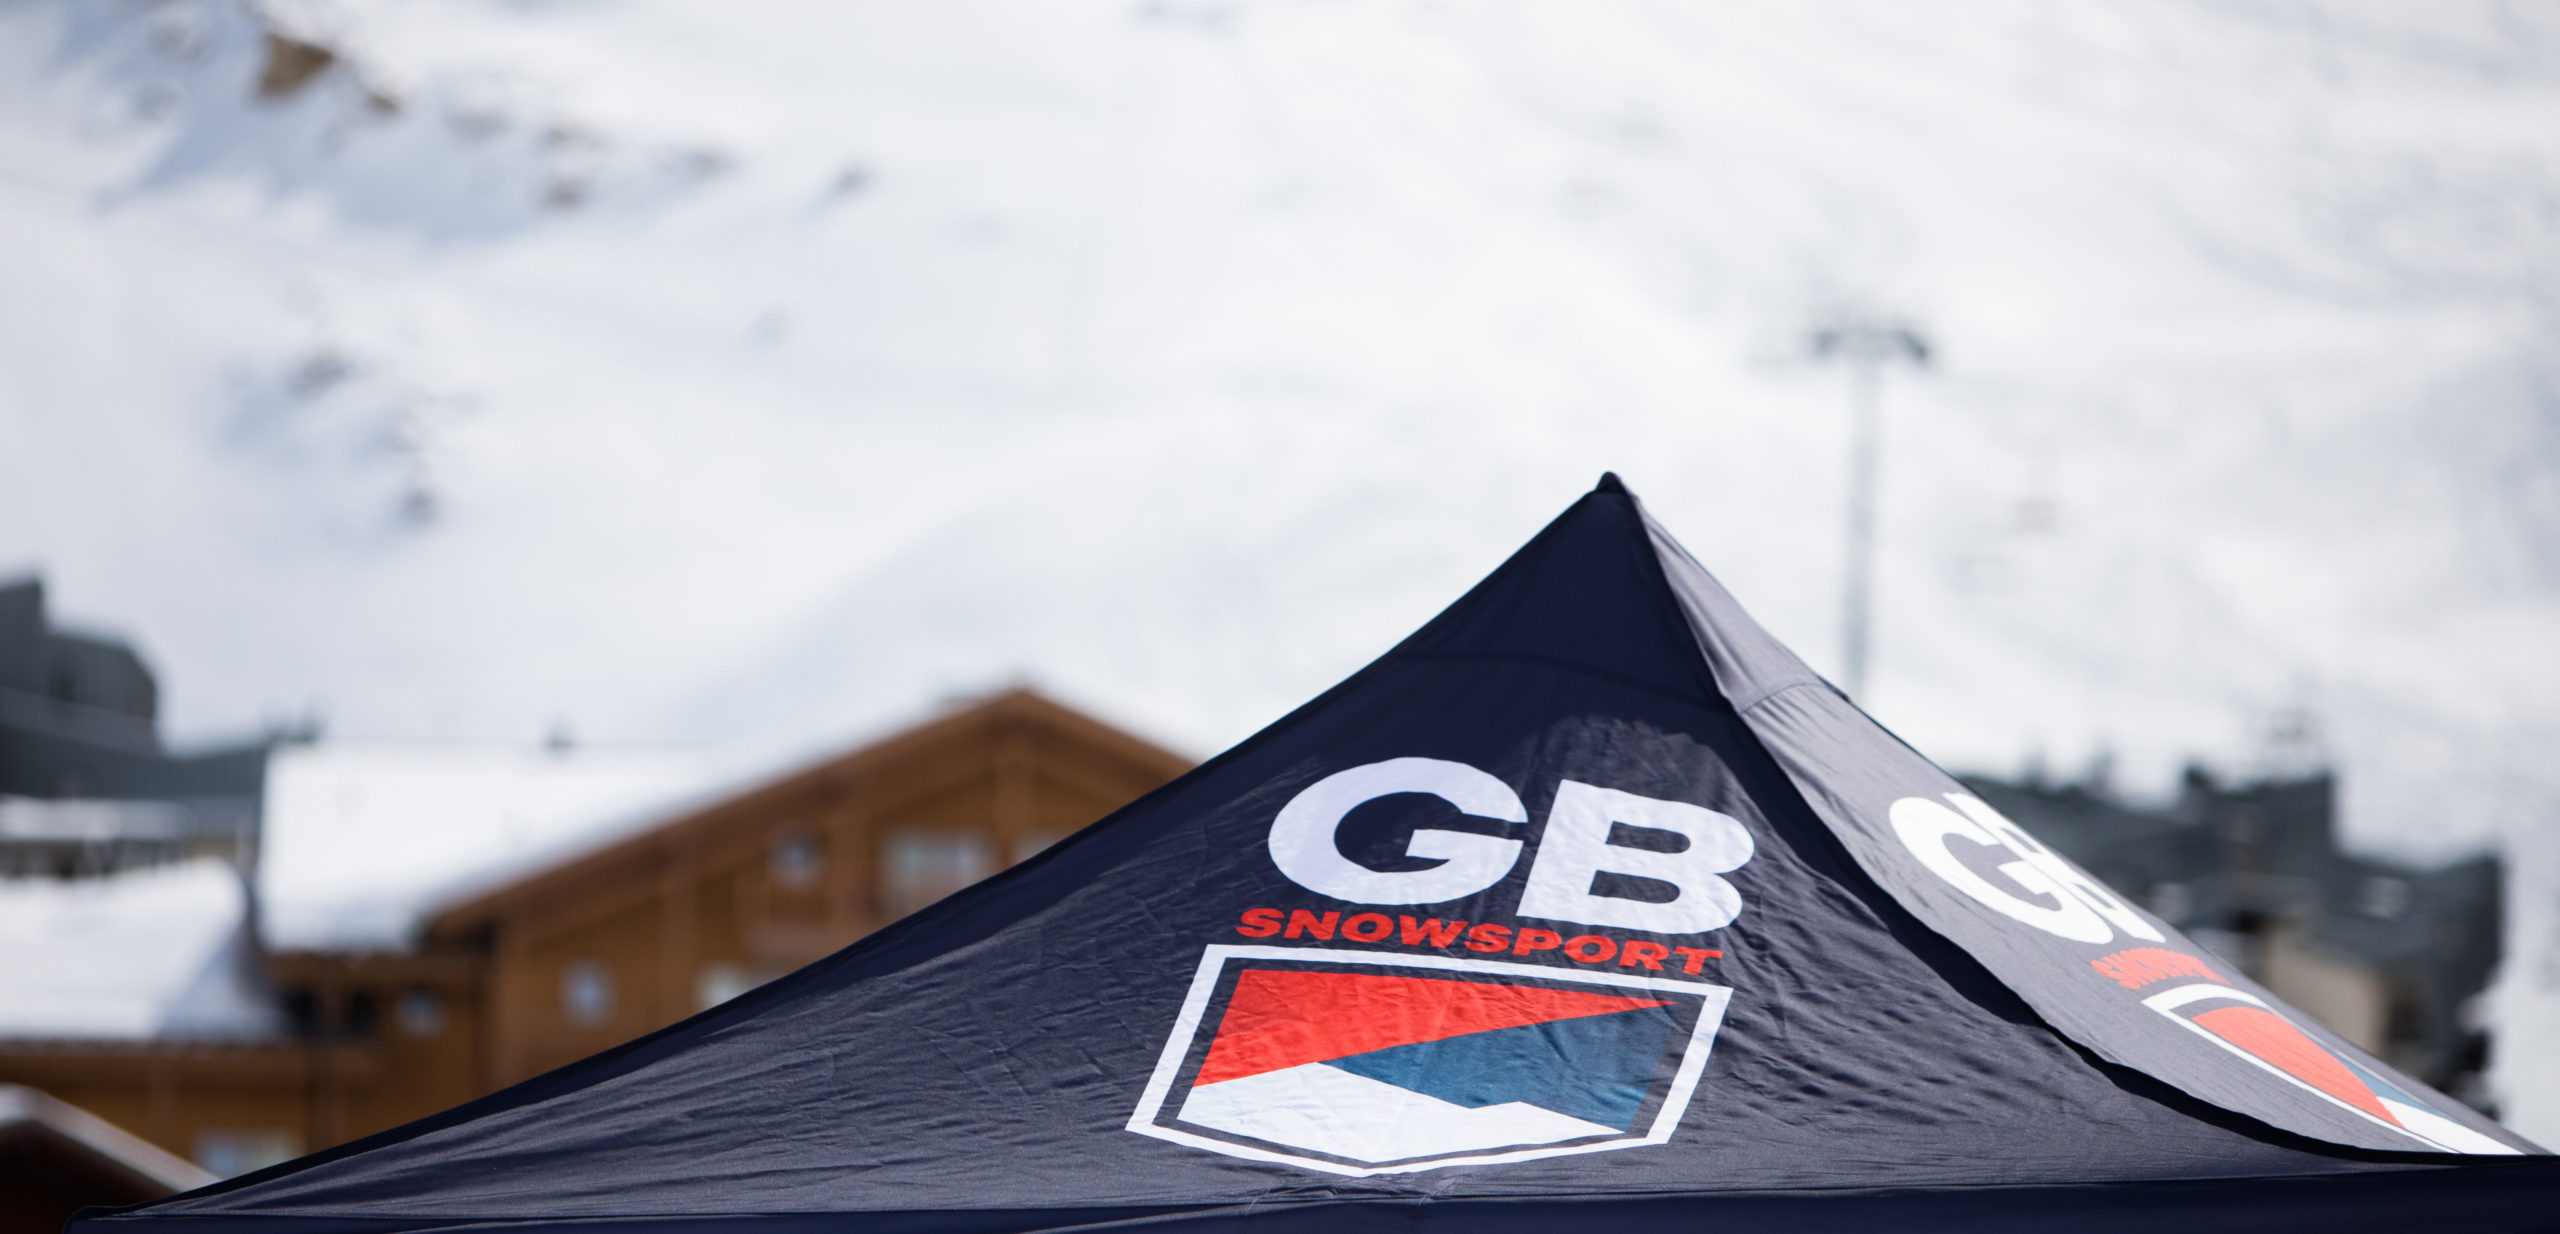 GB Snowsport signals commitment to environmental sustainability